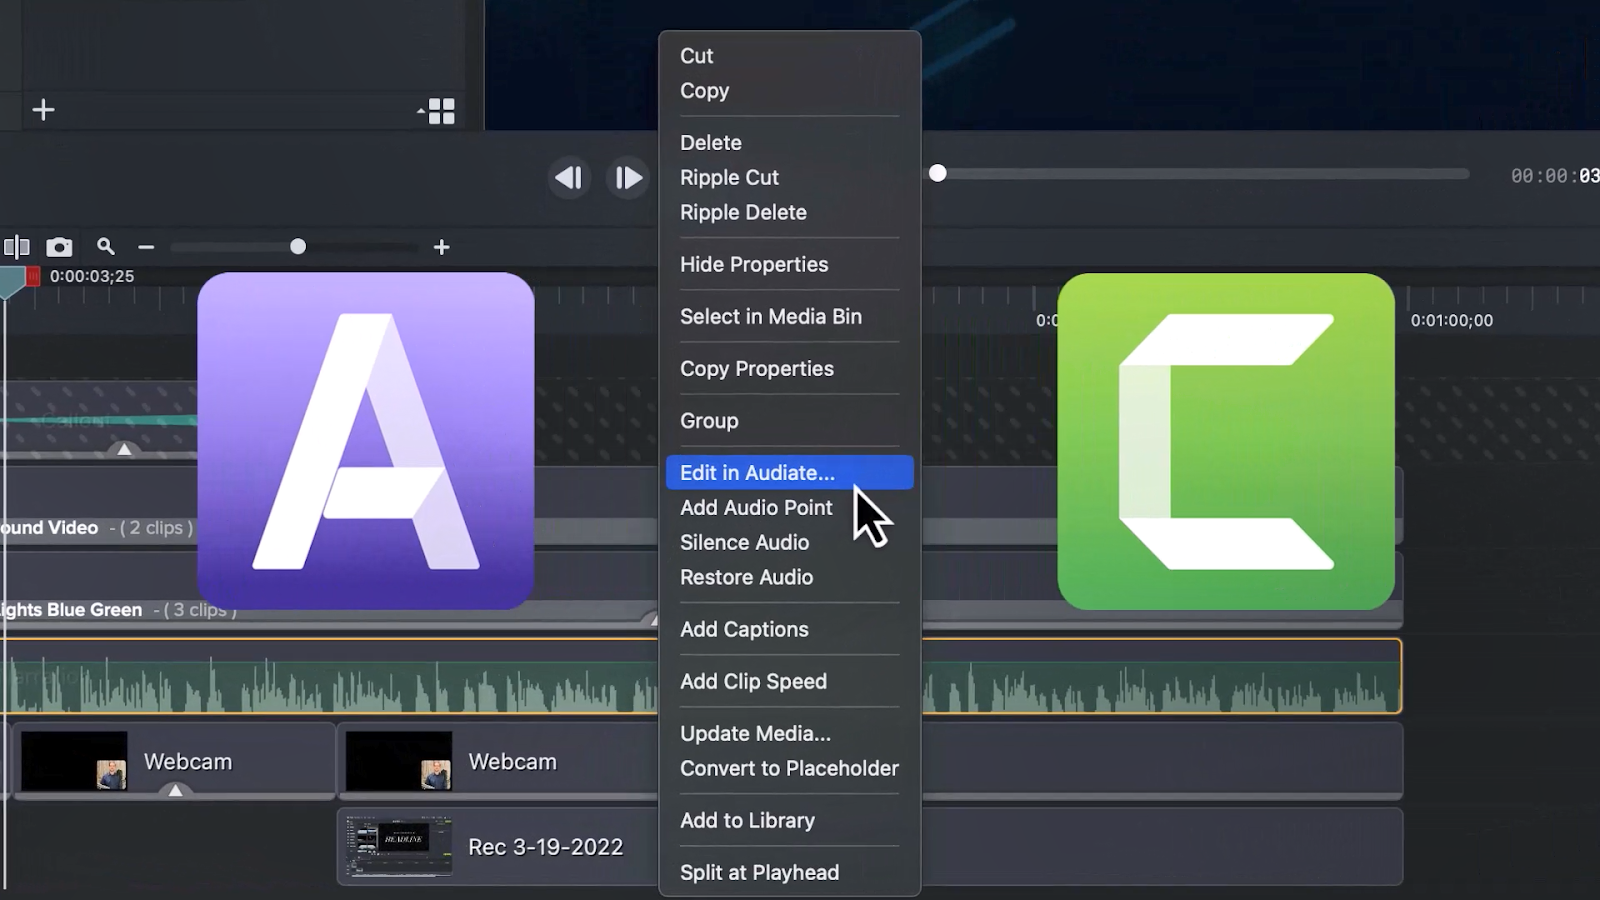 Image of Audiate and Camtasia working together to edit the video in Audiate.